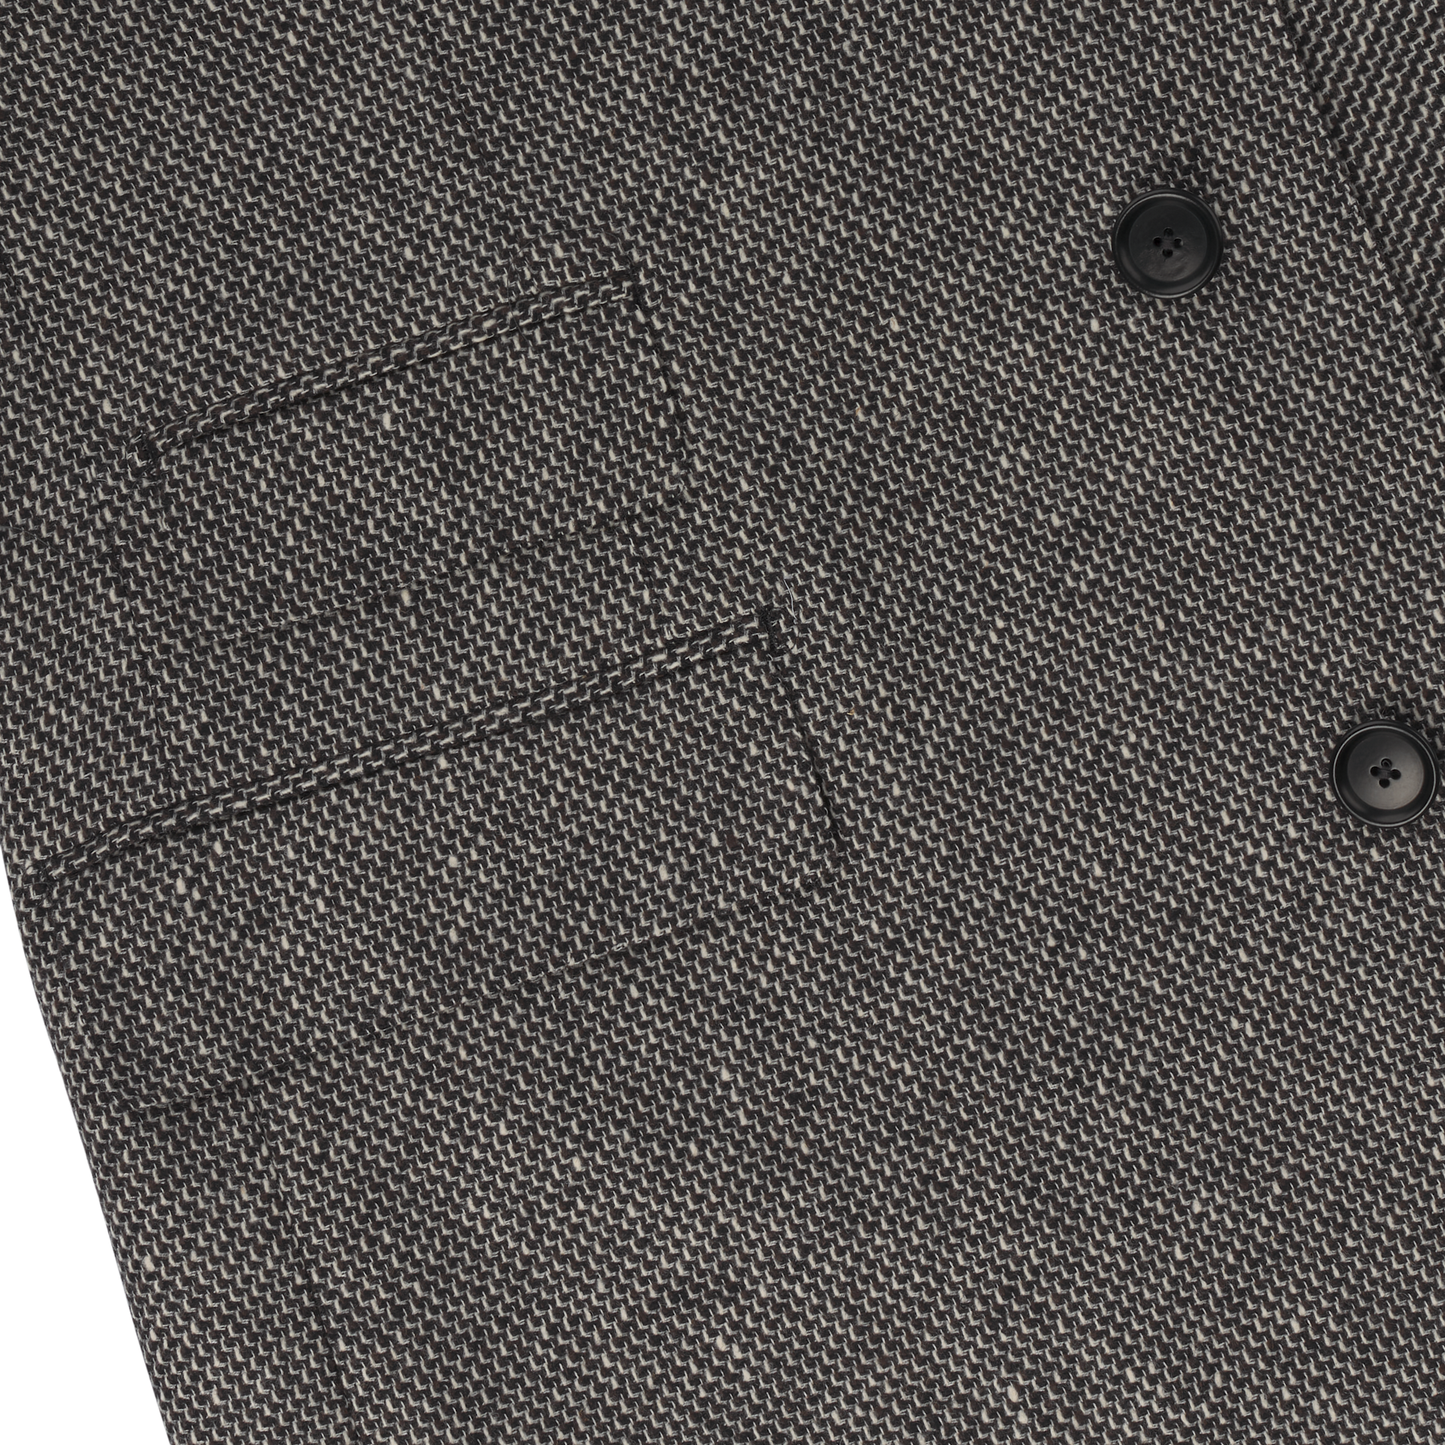 De Petrillo Single-Breasted Wool Coat. Exclusively Made for Sartale - SARTALE